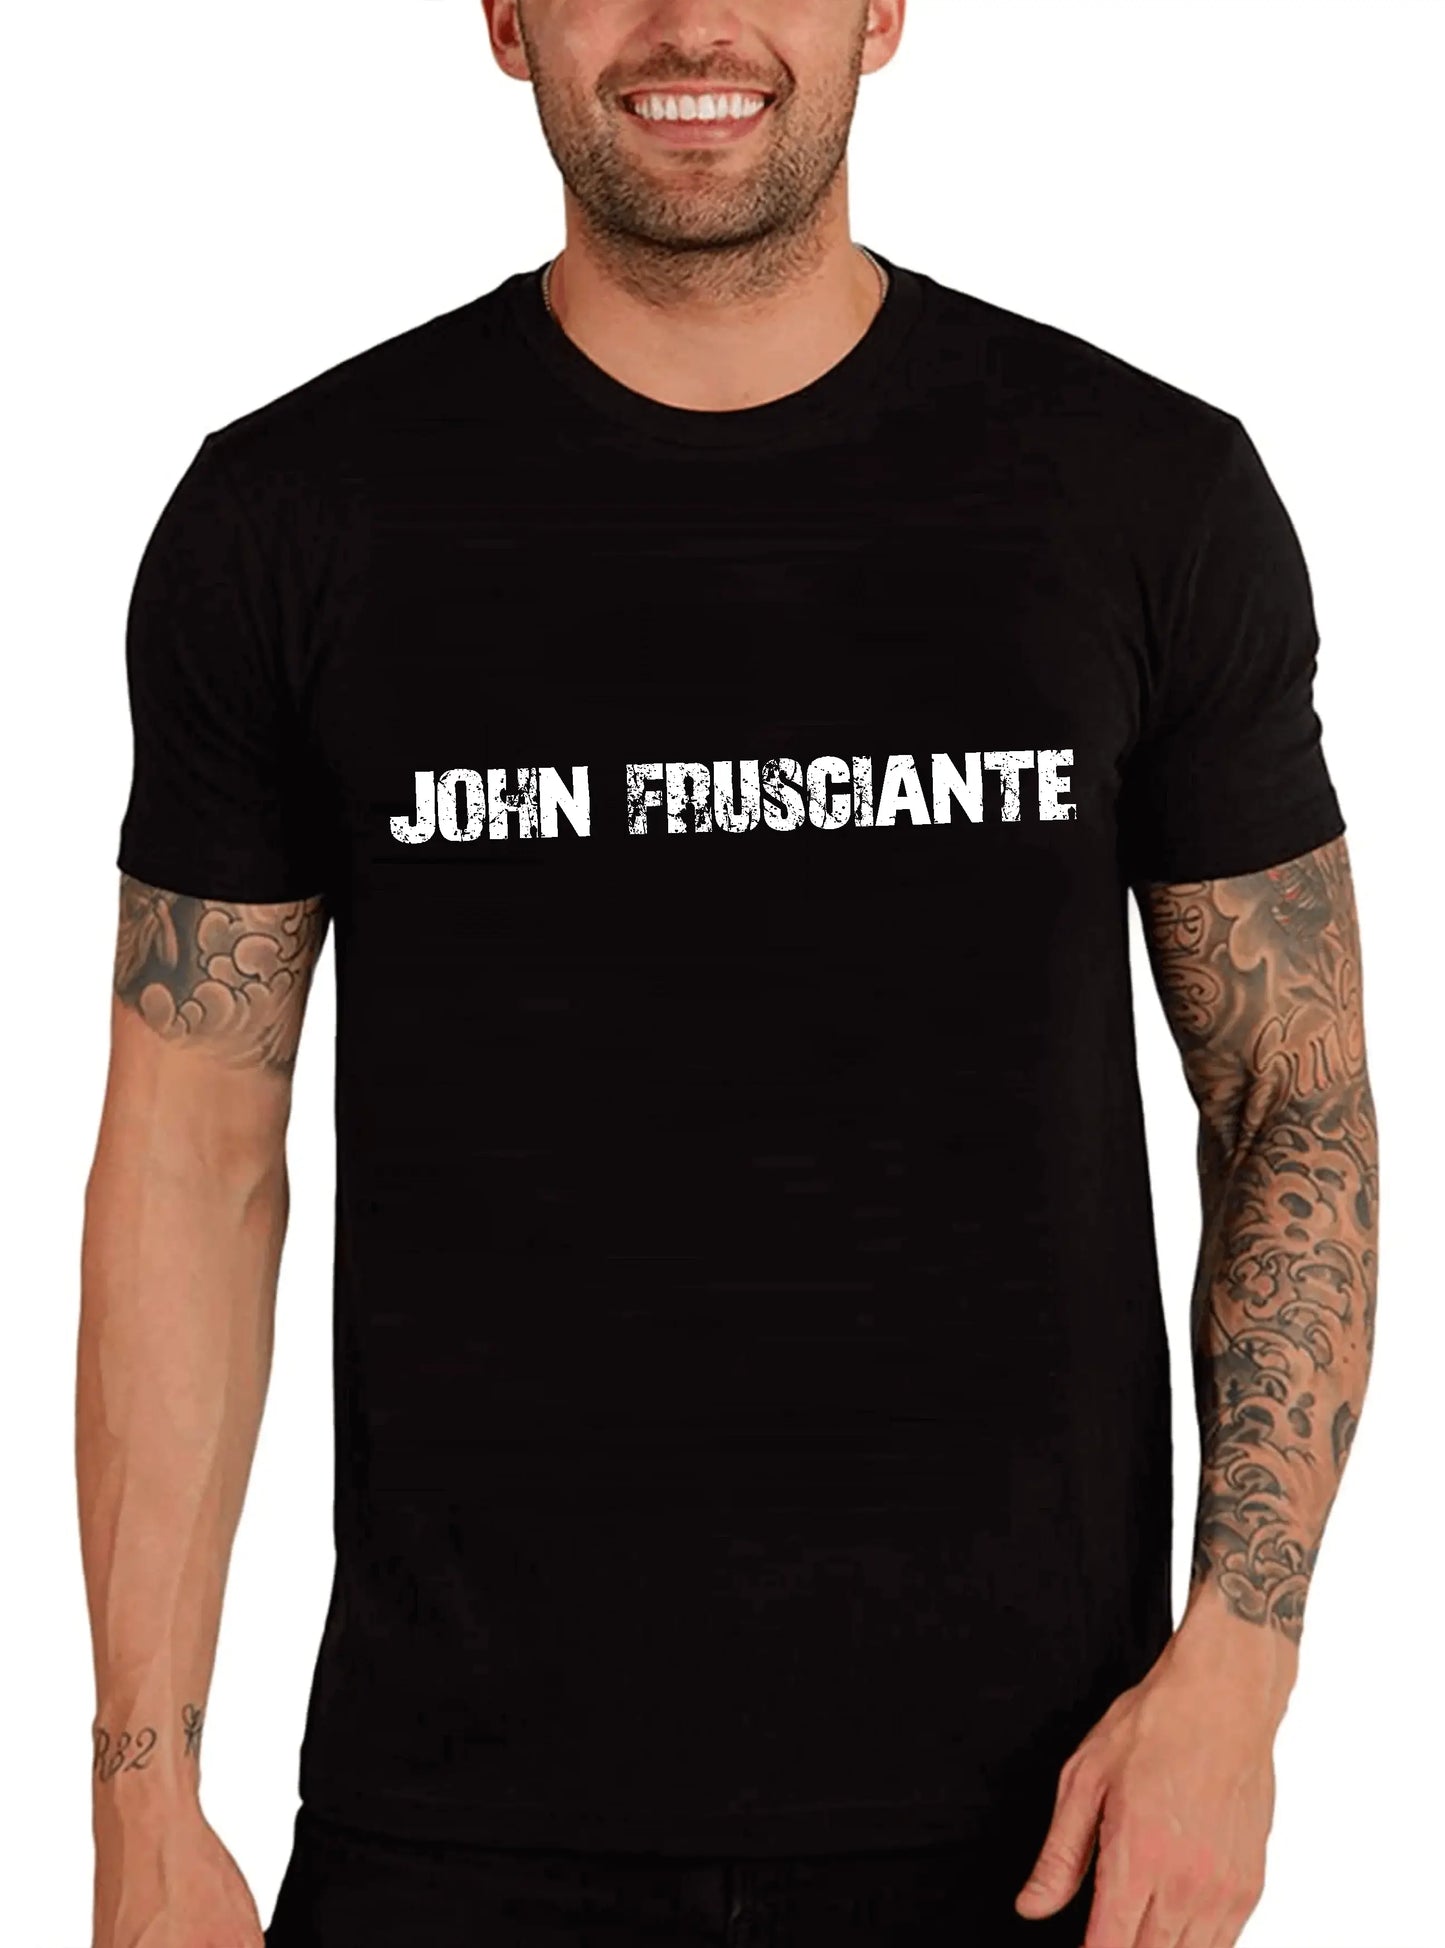 Men's Graphic T-Shirt John Frusciante Eco-Friendly Limited Edition Short Sleeve Tee-Shirt Vintage Birthday Gift Novelty